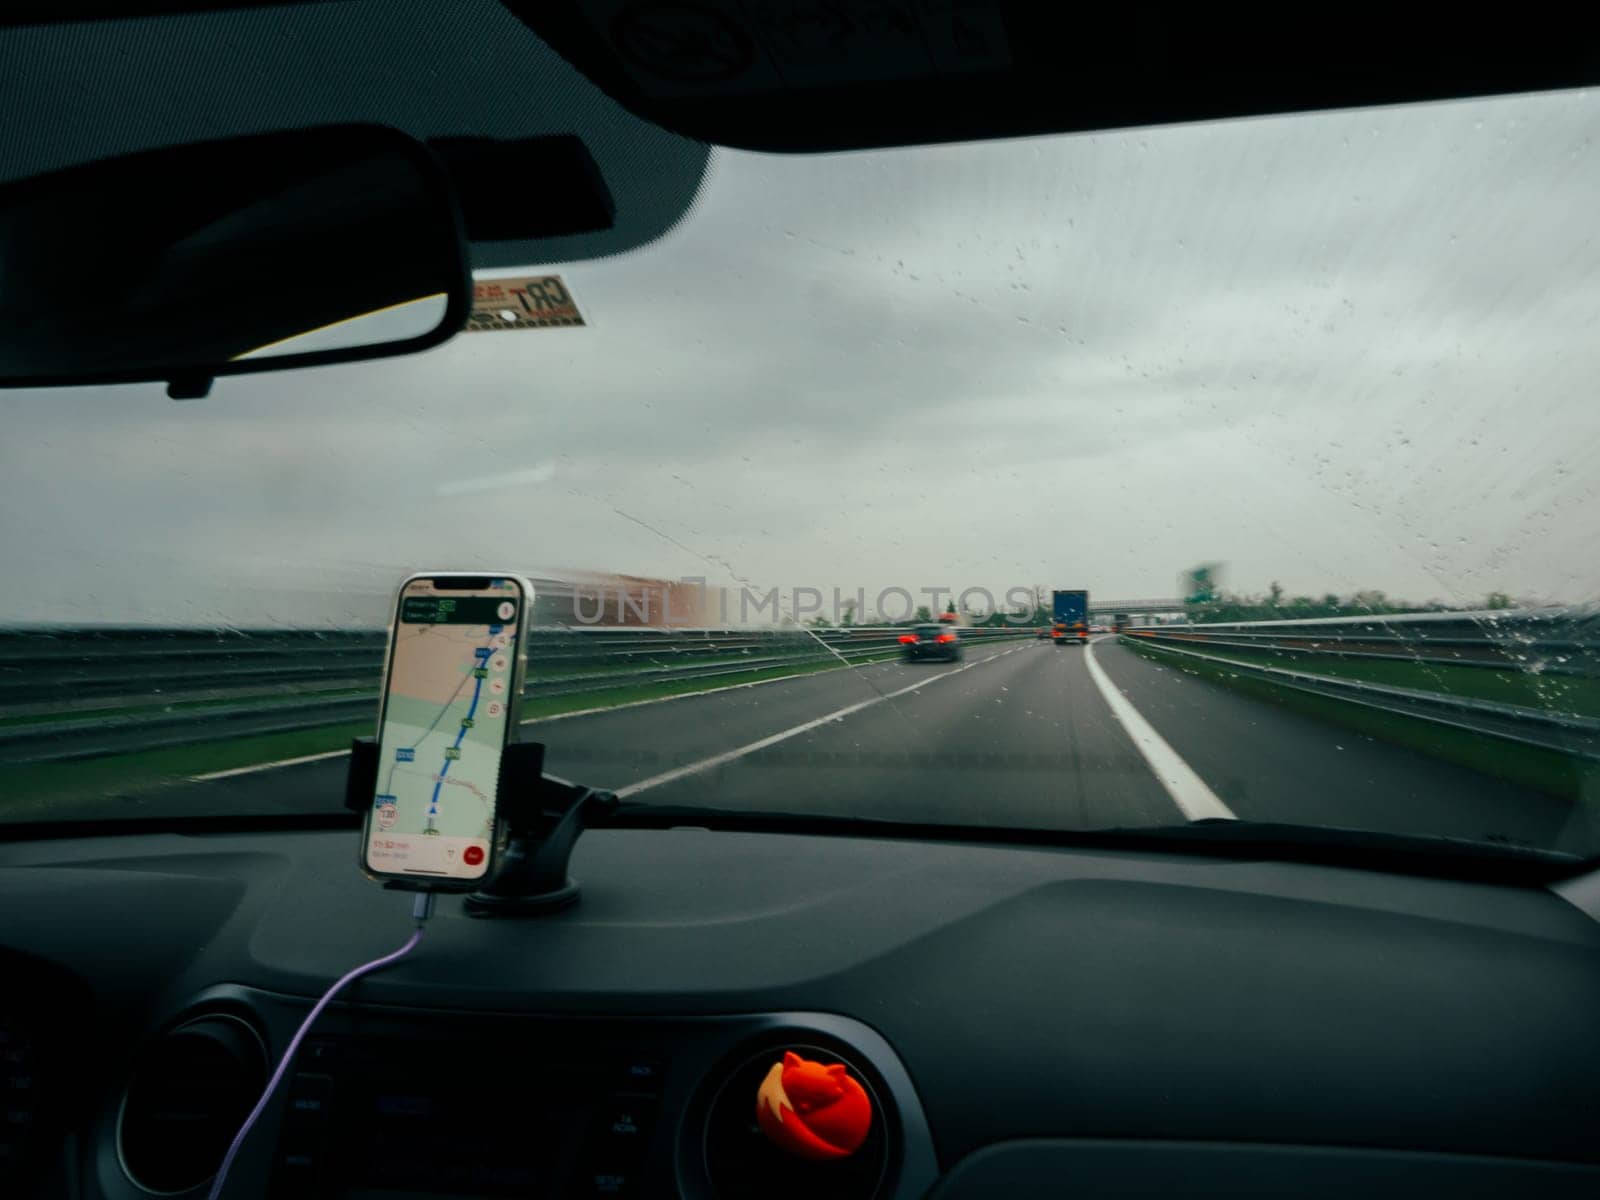 5g Smartphone displaying GPS navigation mounted on a car's dashboard, A1 A8 near Milan, Italy